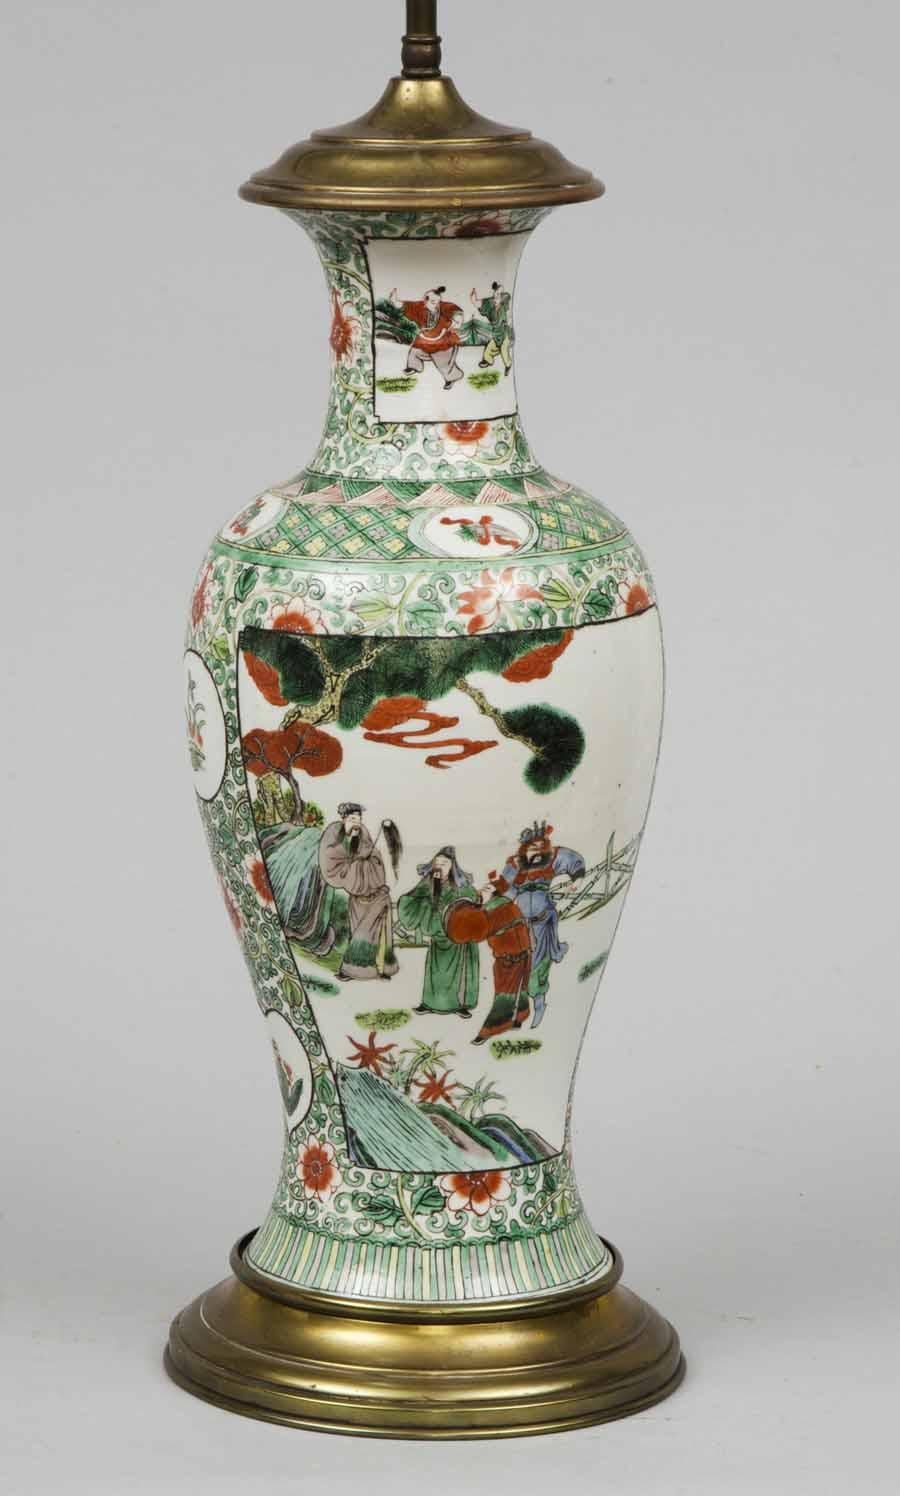 Chinese Famille vert porcelain baluster-shaped lamp mounted on a bronze base, the panels front and back are decorated with male figures, bamboo trees, rocks with overall design of flowers, swirling vines and leaves. Height is adjustable.